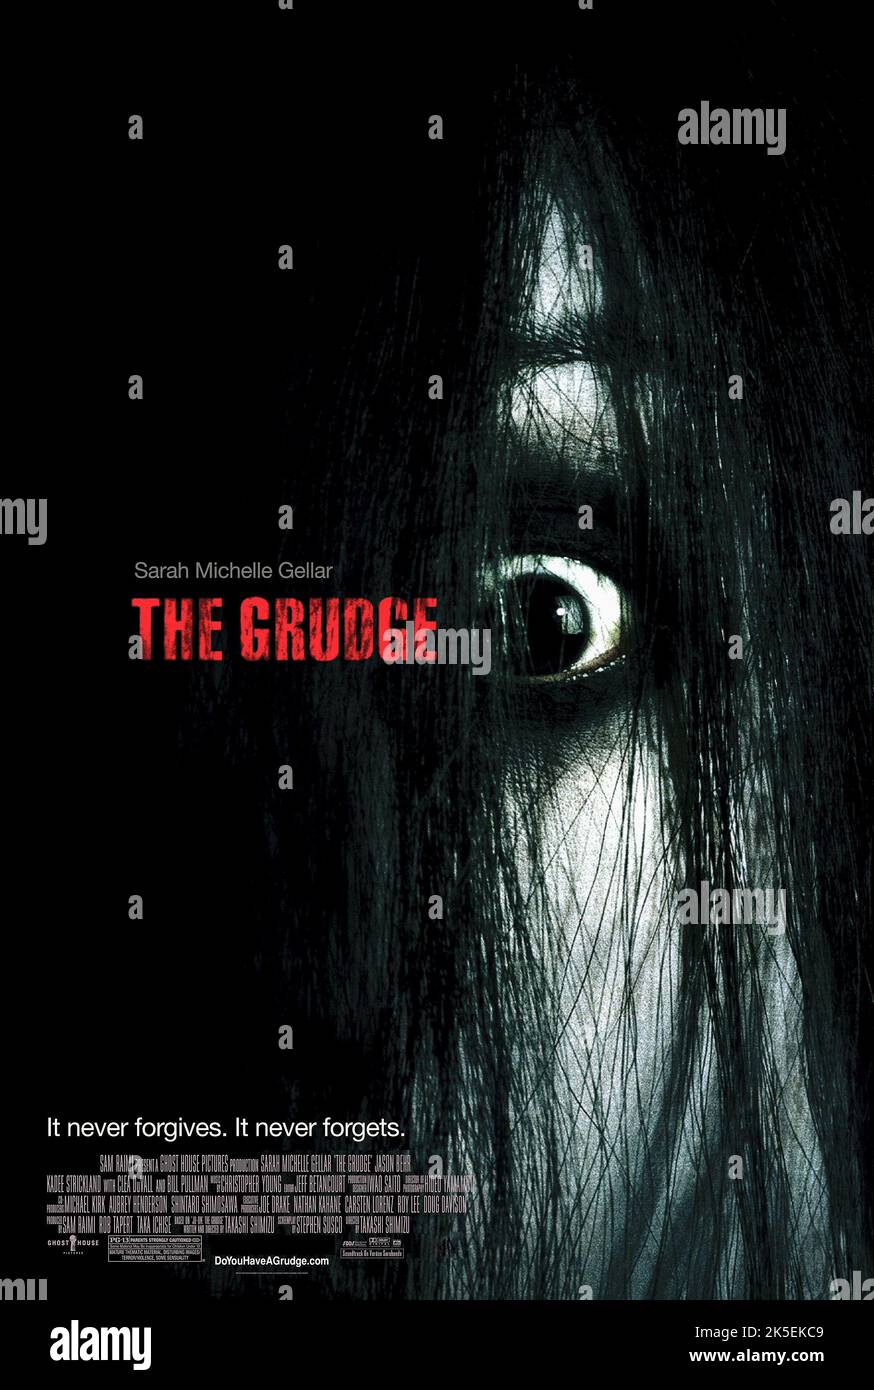 FILM POSTER, THE GRUDGE, 2004 Stock Photo